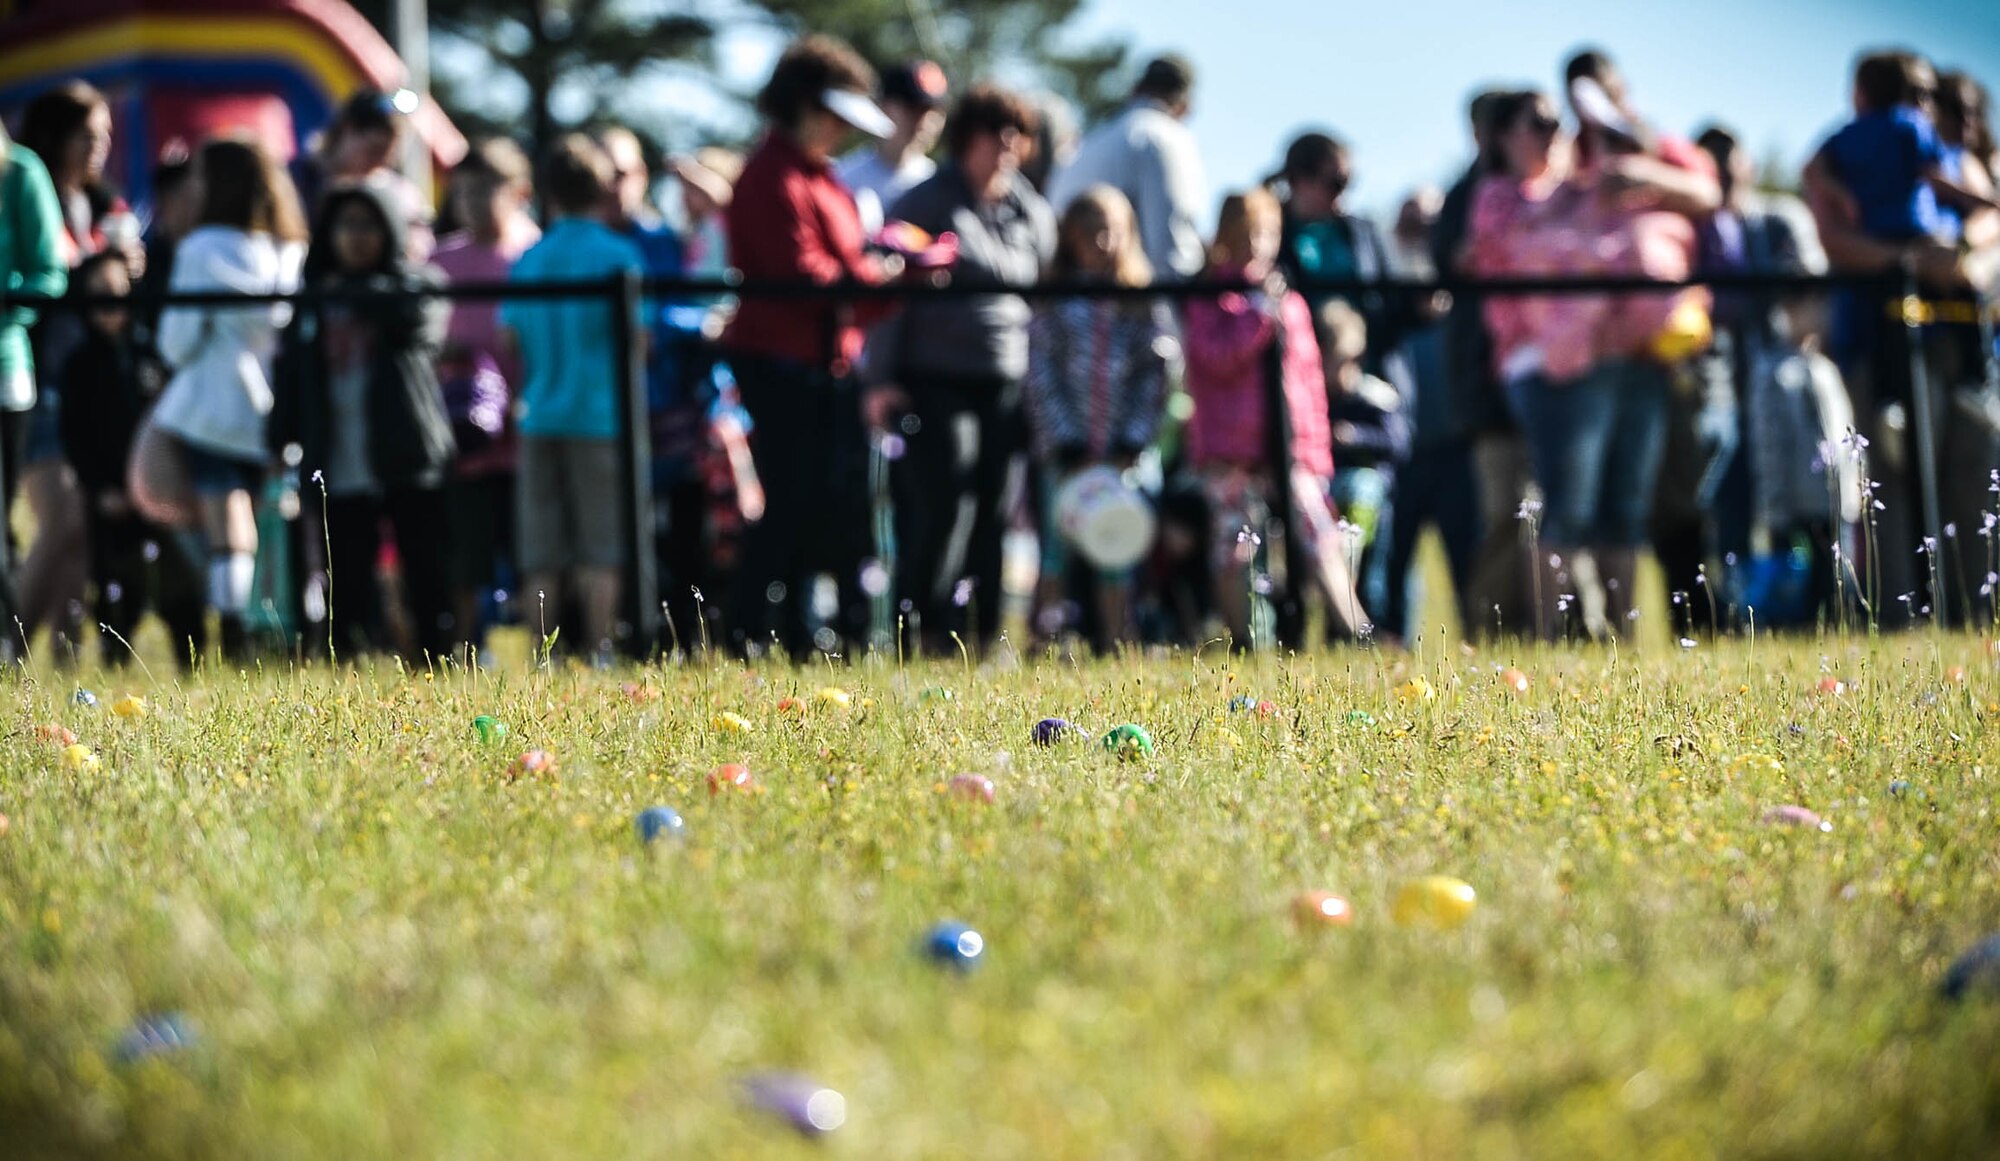 Easter eggs are scattered across a field during a Month of the Military Child celebration at Shaw Air Force Base, S.C., March 31, 2018.